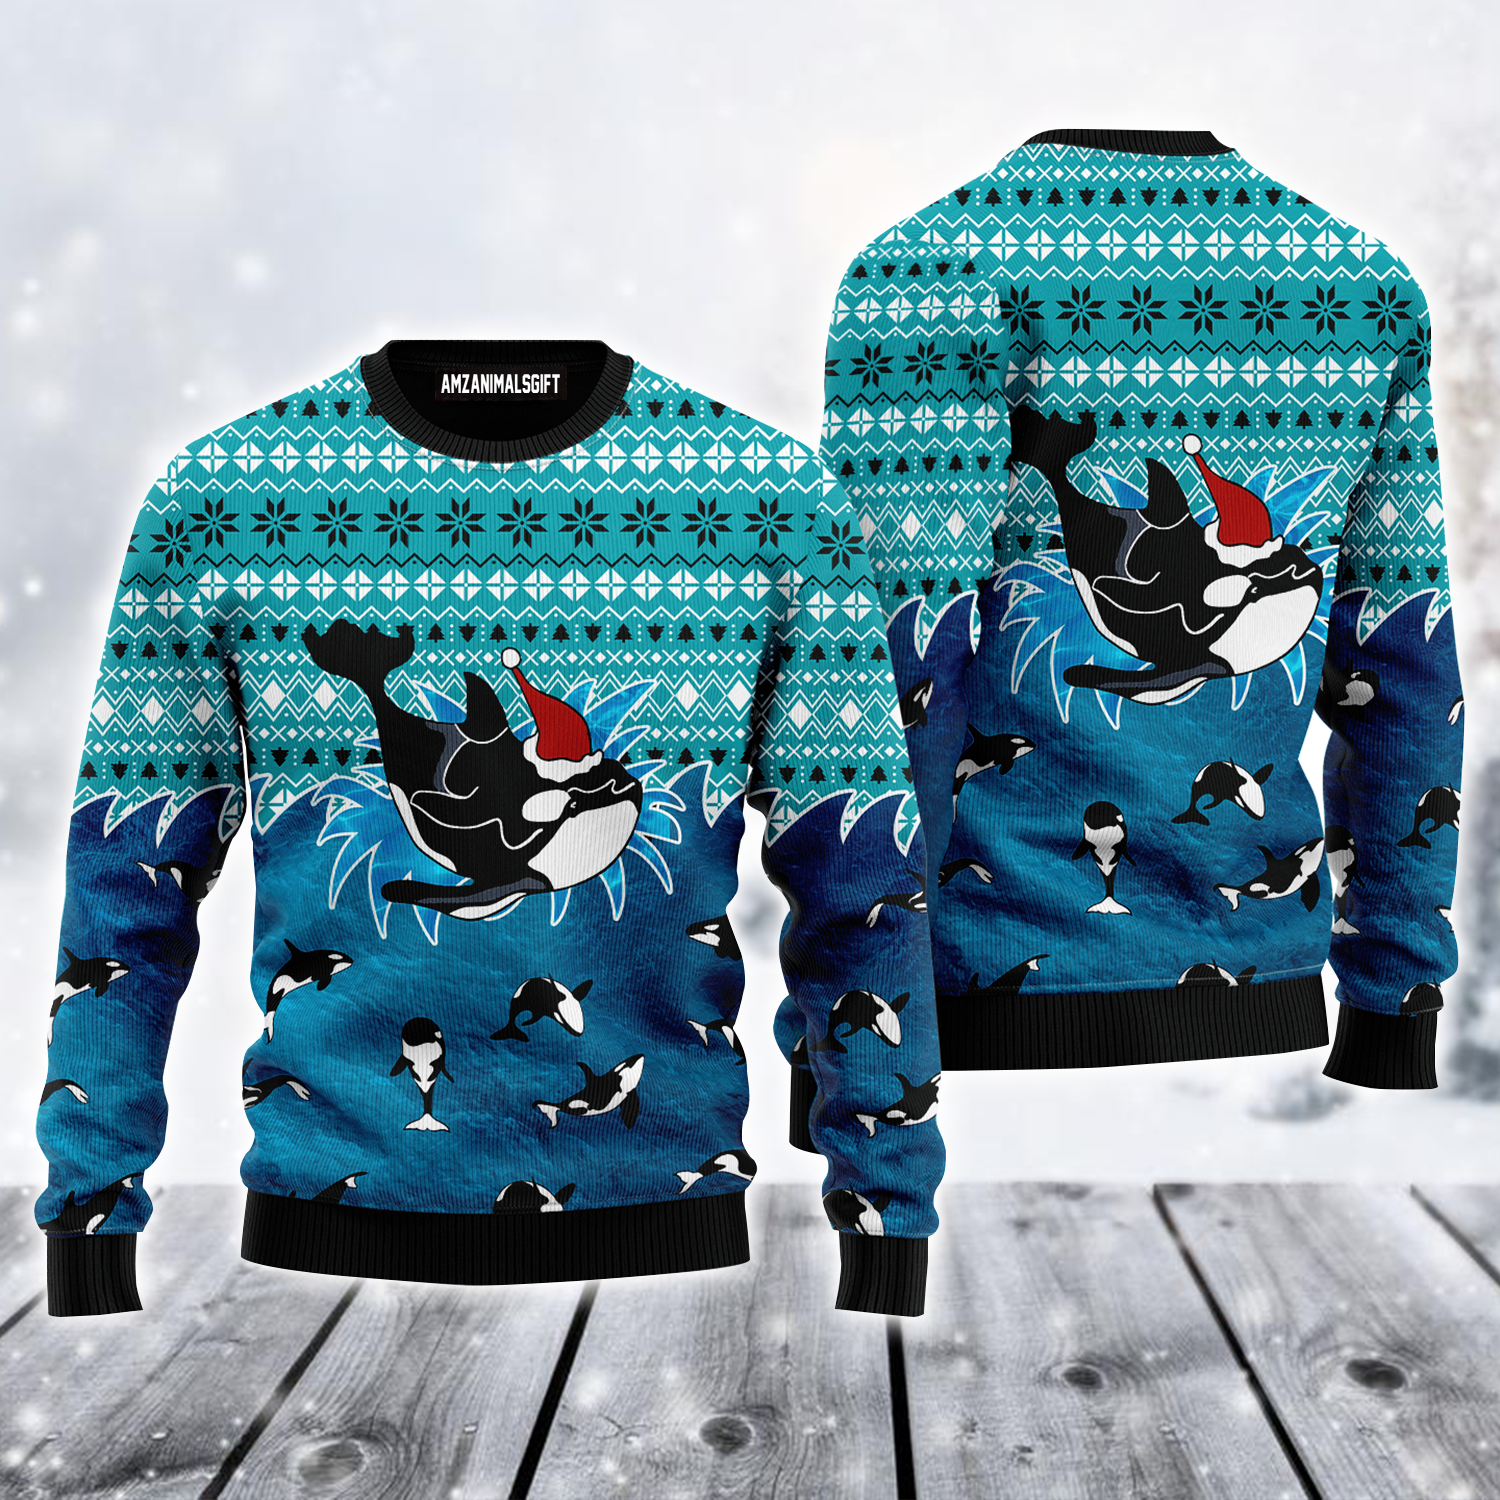 Funny Orcas Ugly weater, Orcas & Christmas Ugly Sweater, Funny Blue Sweater For Men & Women, Perfect Gift For Orcas Lover, Friends, Family